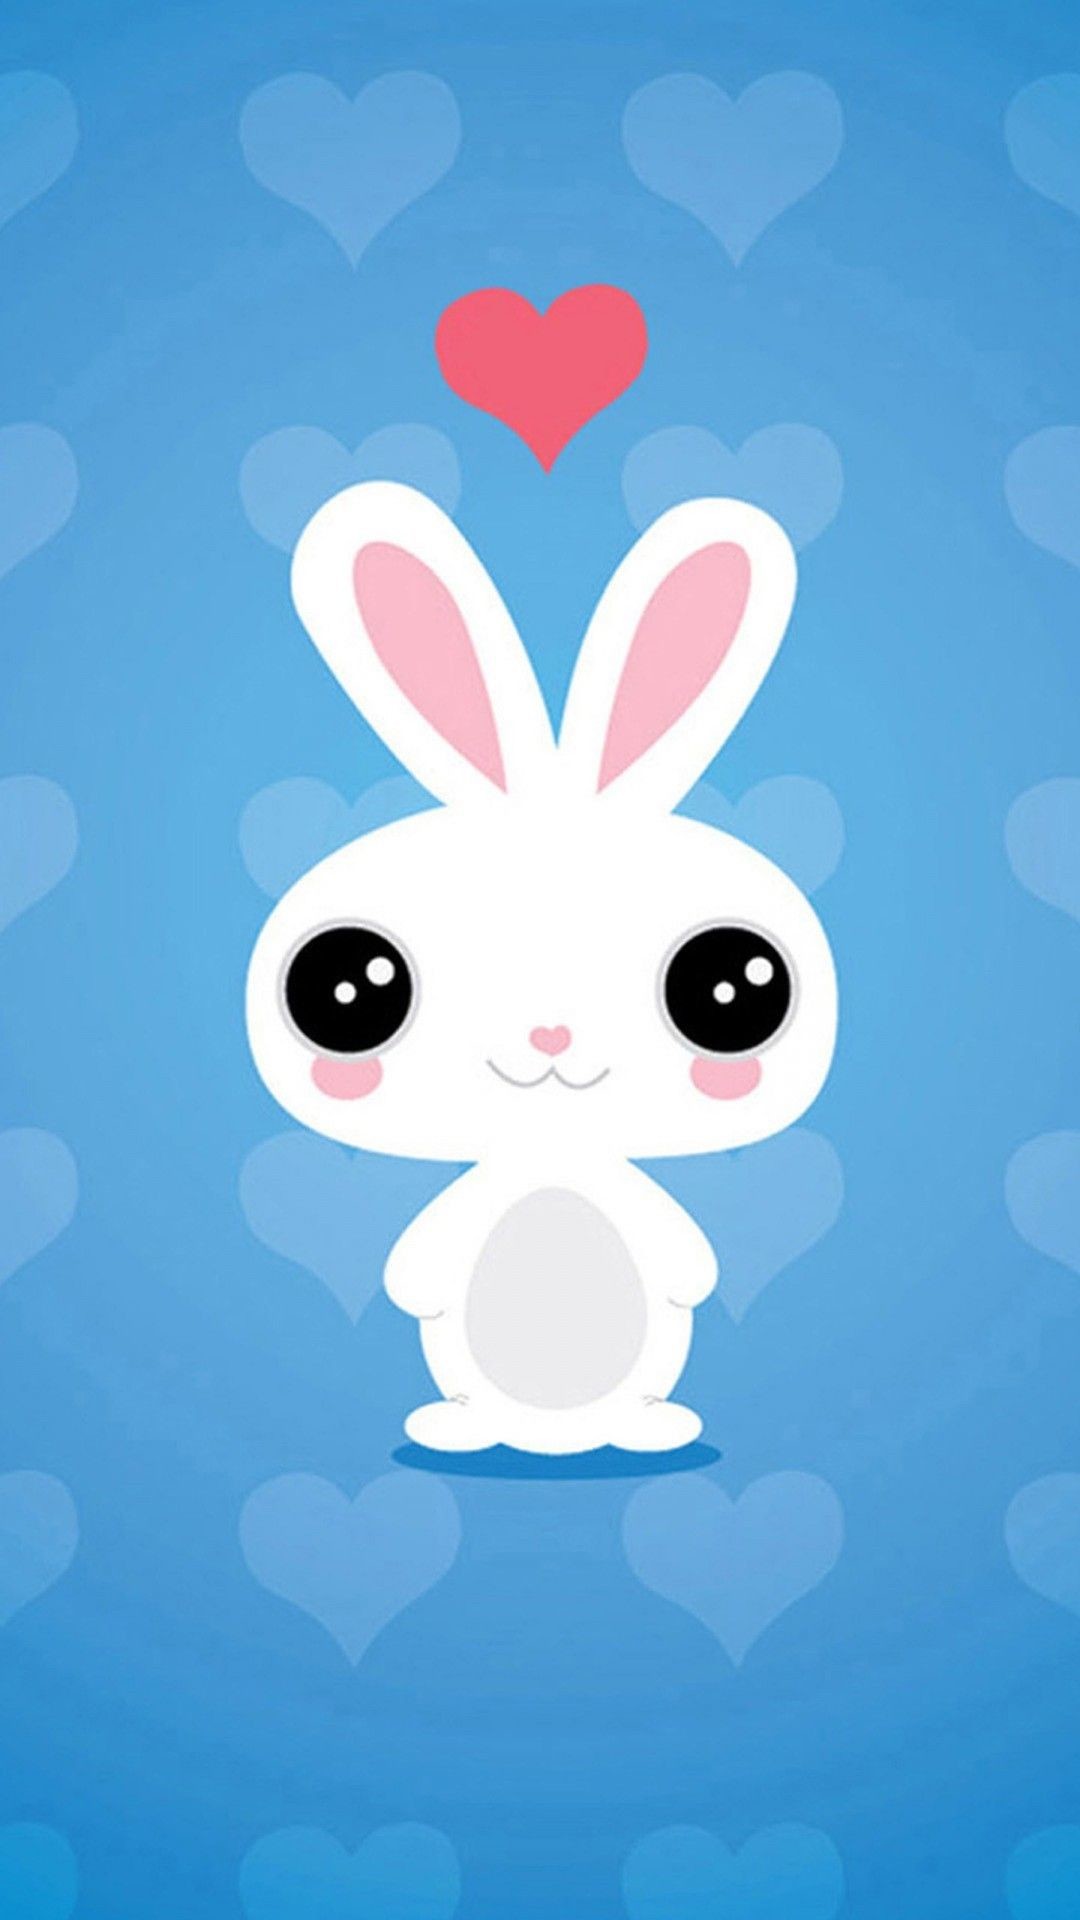 White cute aesthetic cartoon bunny wallpaper for iPhone and Android  Bunny  wallpaper Rabbit wallpaper Cute anime wallpaper